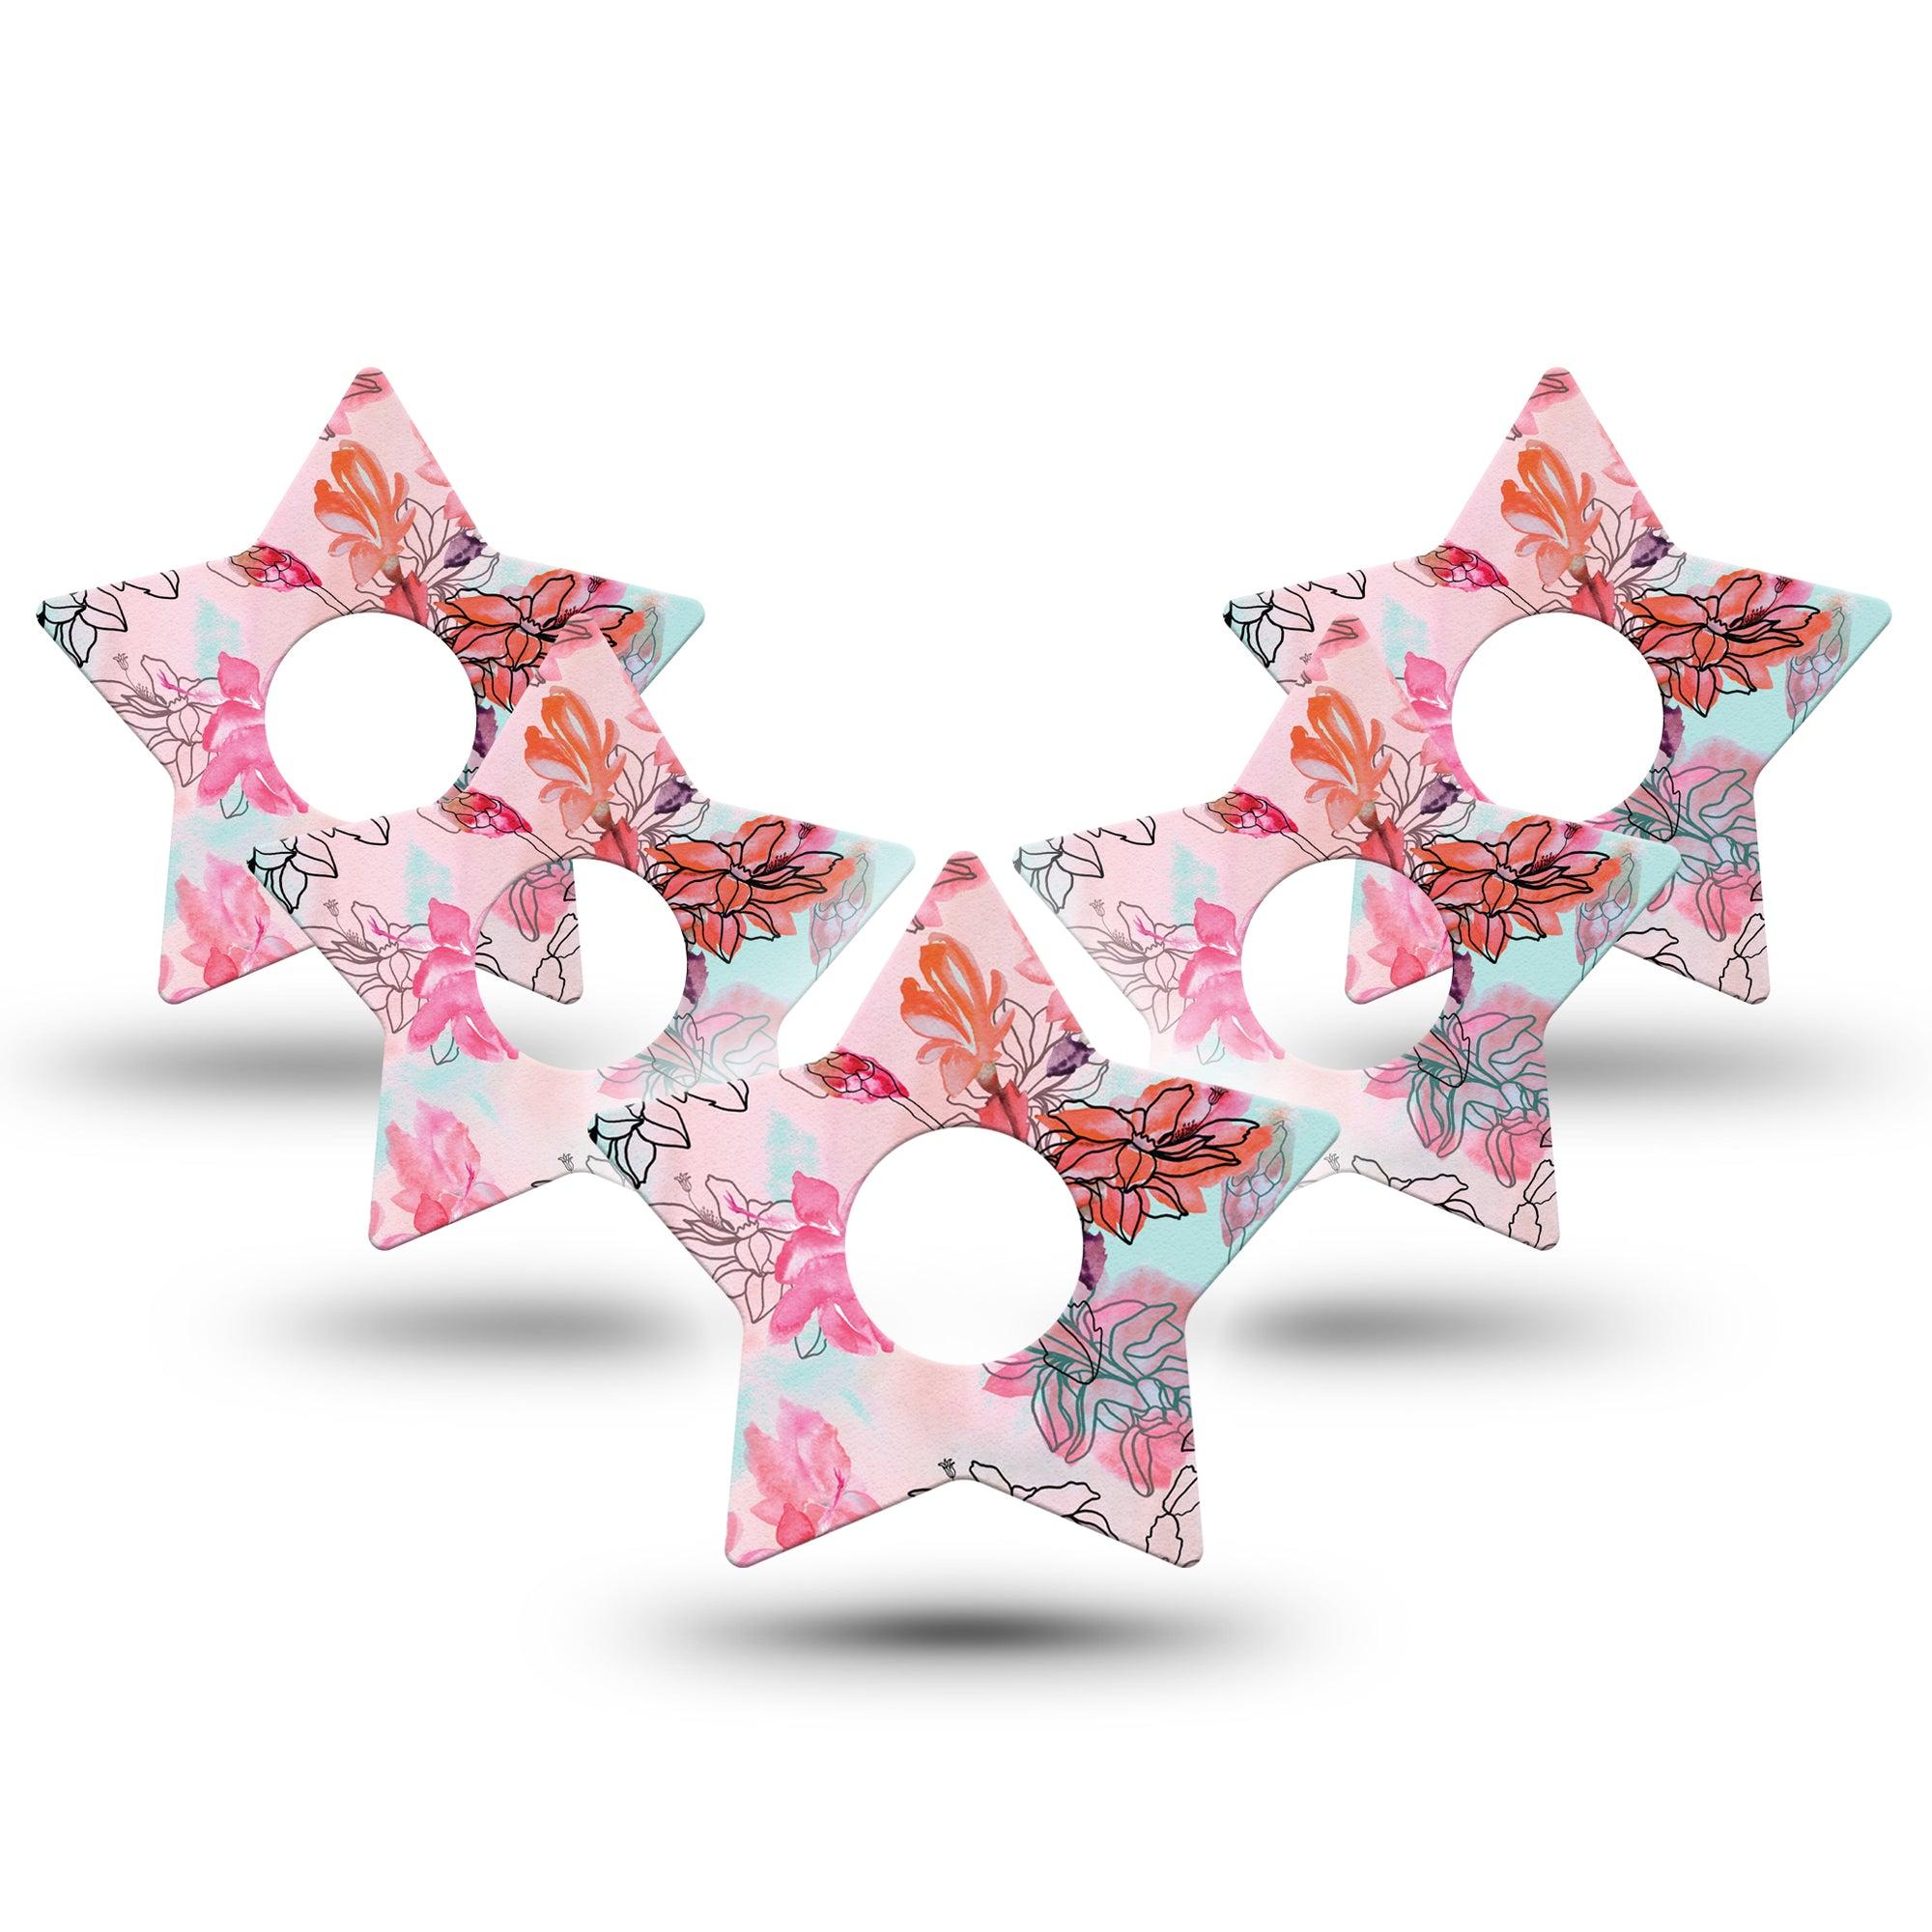 ExpressionMed Whimsical Blossoms Star Libre 3 Tape, Single, Amusing Florals Themed, CGM Overlay Patch Design